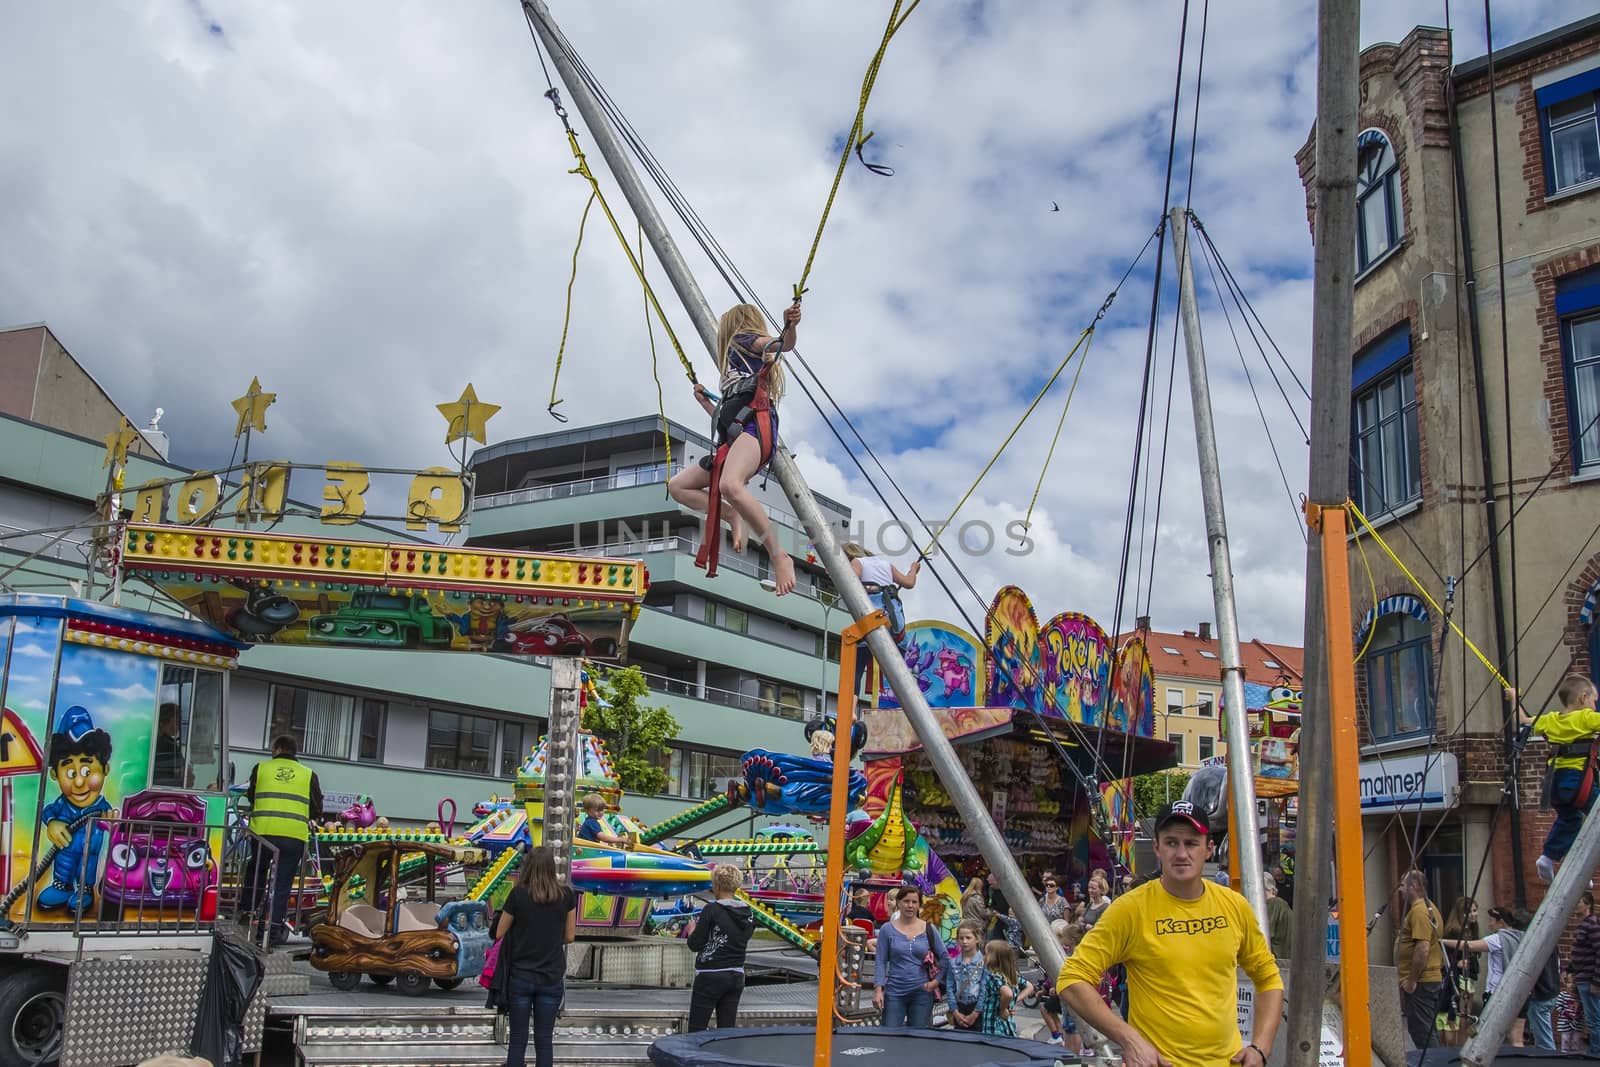 Kids have fun at the funfair on the square in Halden, Norway.